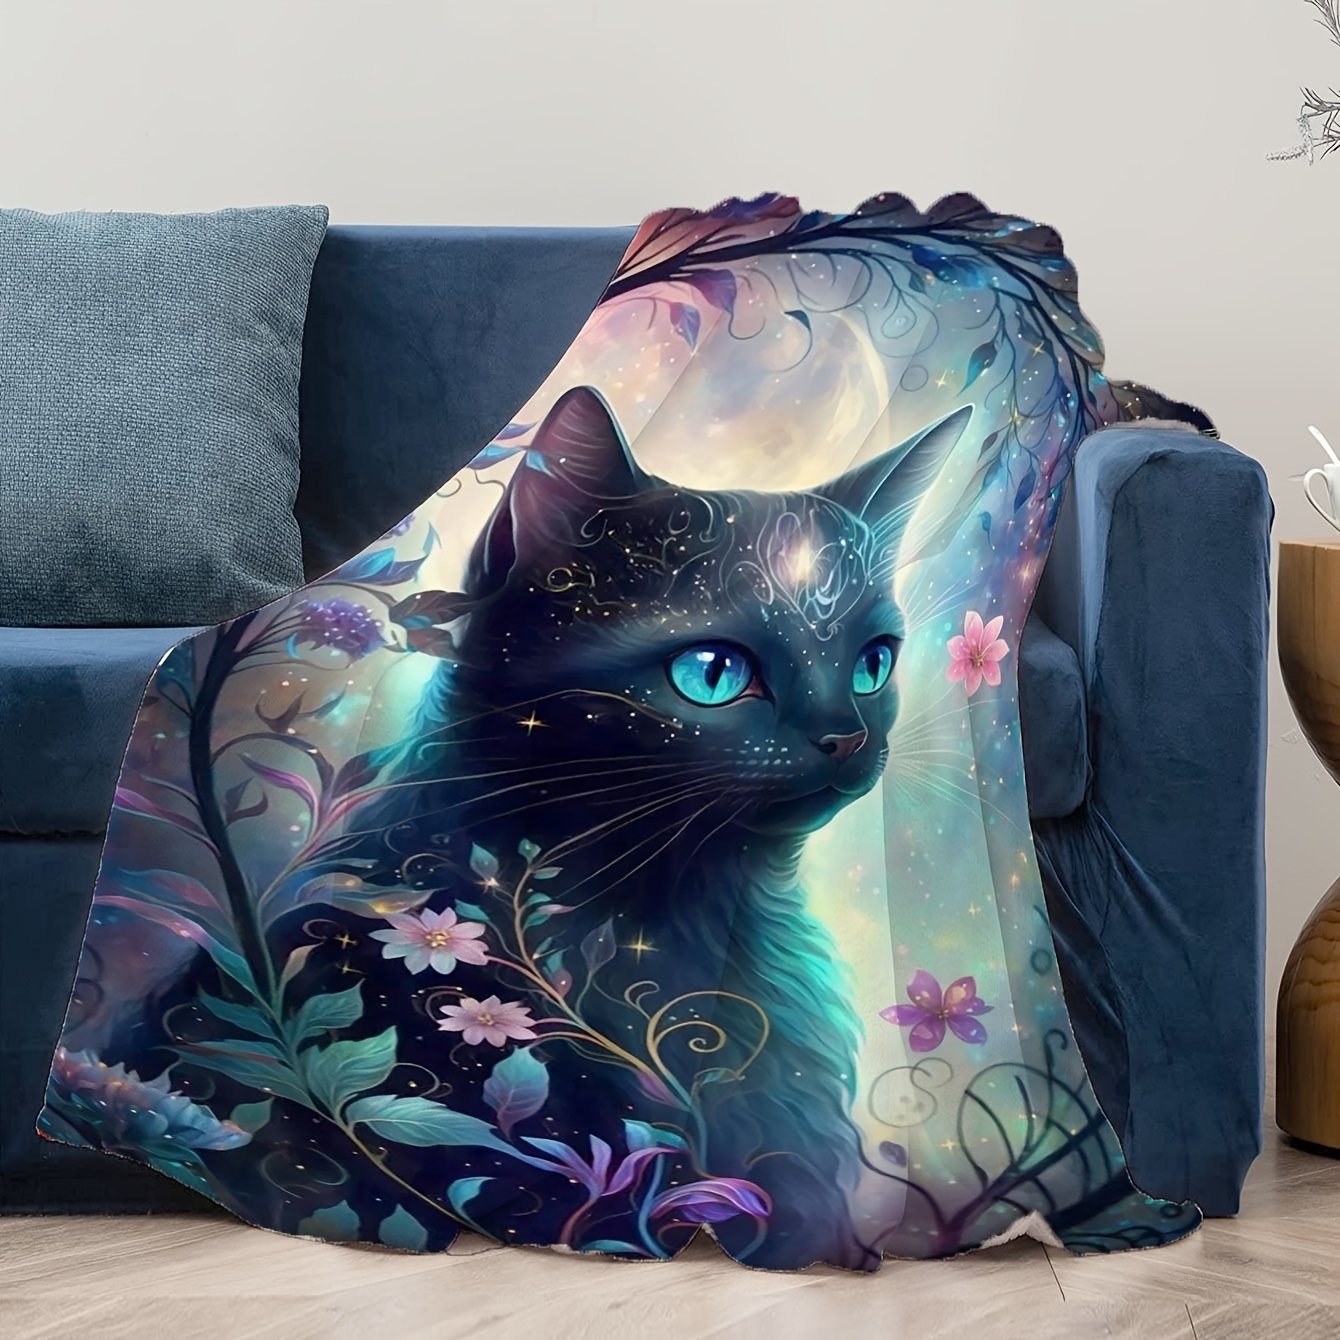 1pc Linen Throw Blanket, Charming Black Cat Pattern Printed Blanket, Warm  Cozy Soft Blanket For Couch Bed Sofa Car Office Camping Travelling, Gift Bla